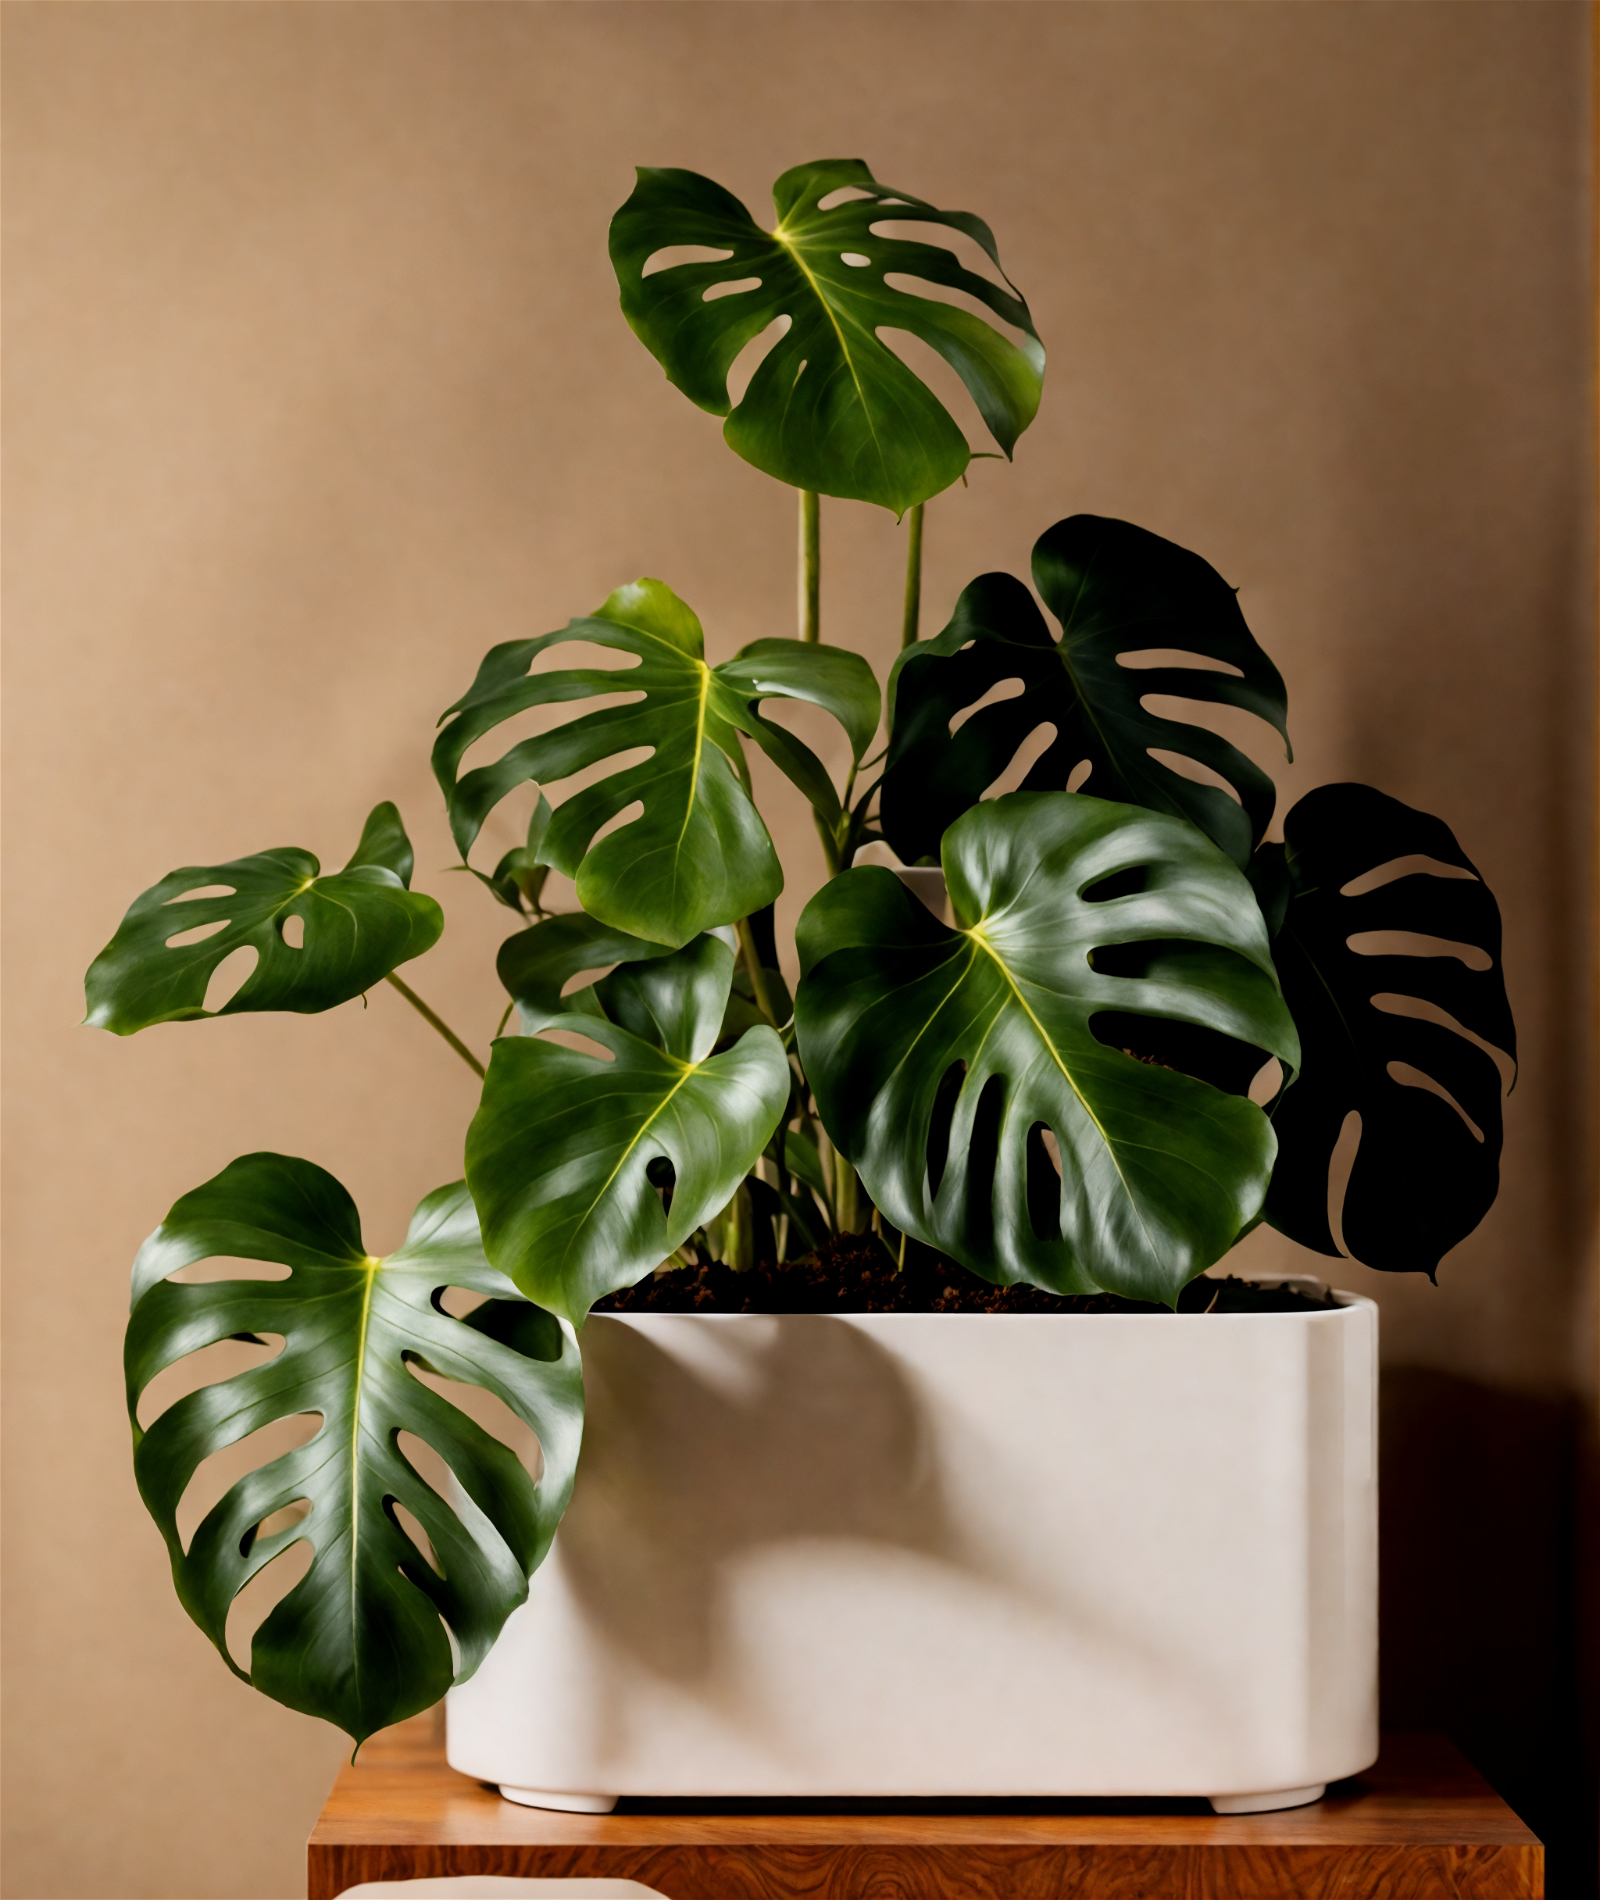 Monstera deliciosa plant with detailed leaves in a planter, set against a dark background in clear lighting.